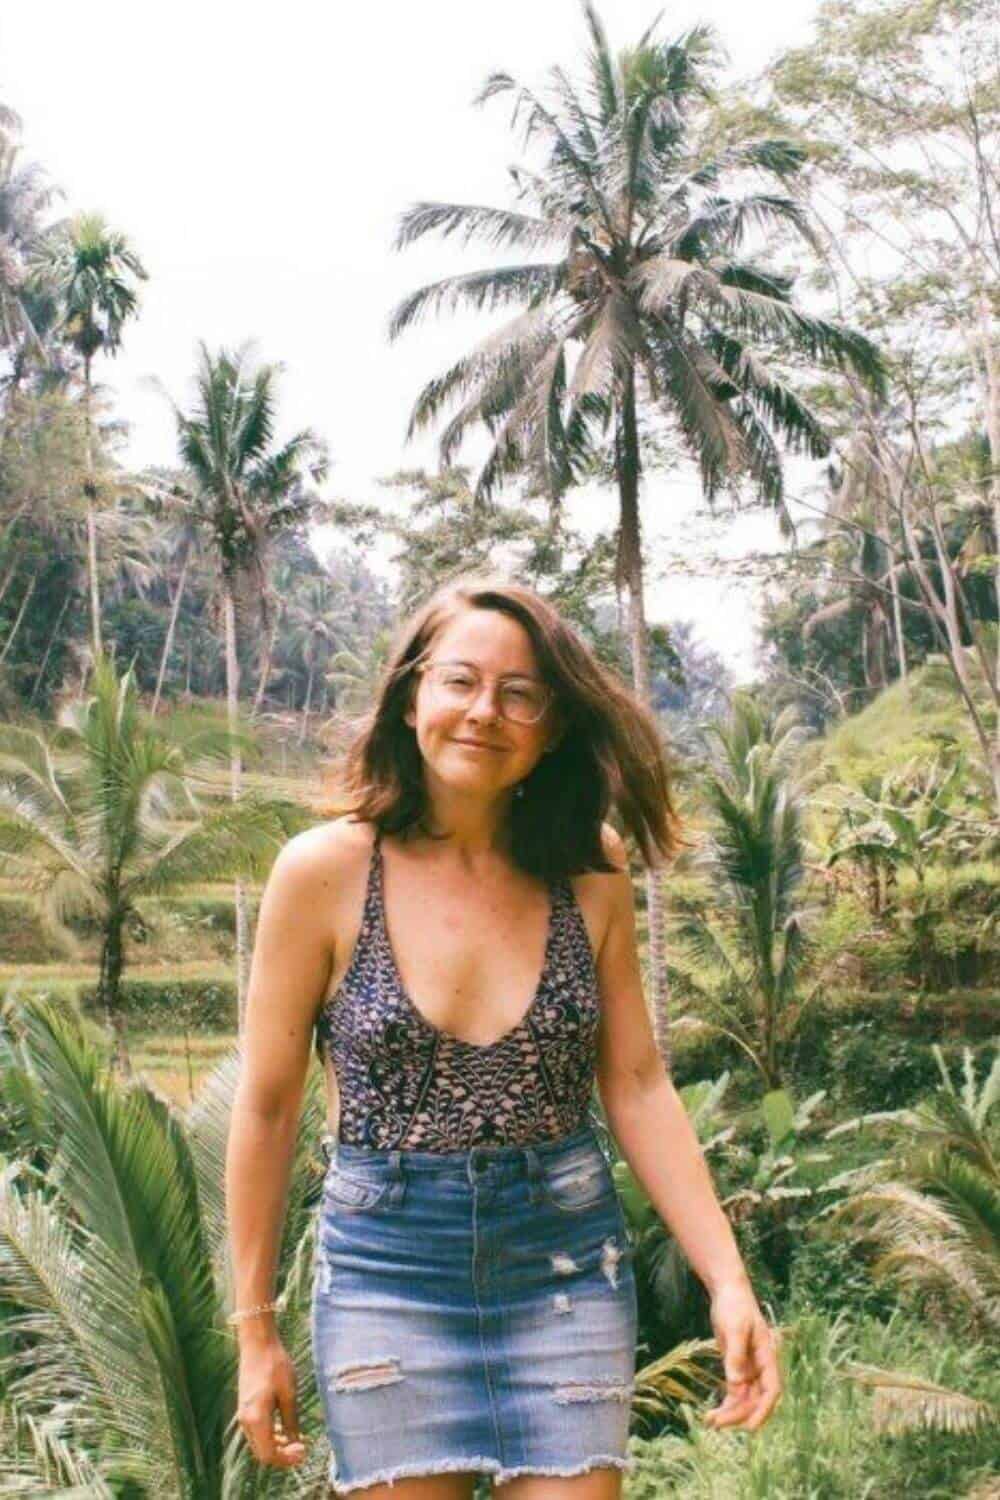 Ethical Beauty, Self Love And Women Empowerment with Elysse Crabtree on the Sustainable Jungle Podcast #sustainablejungle